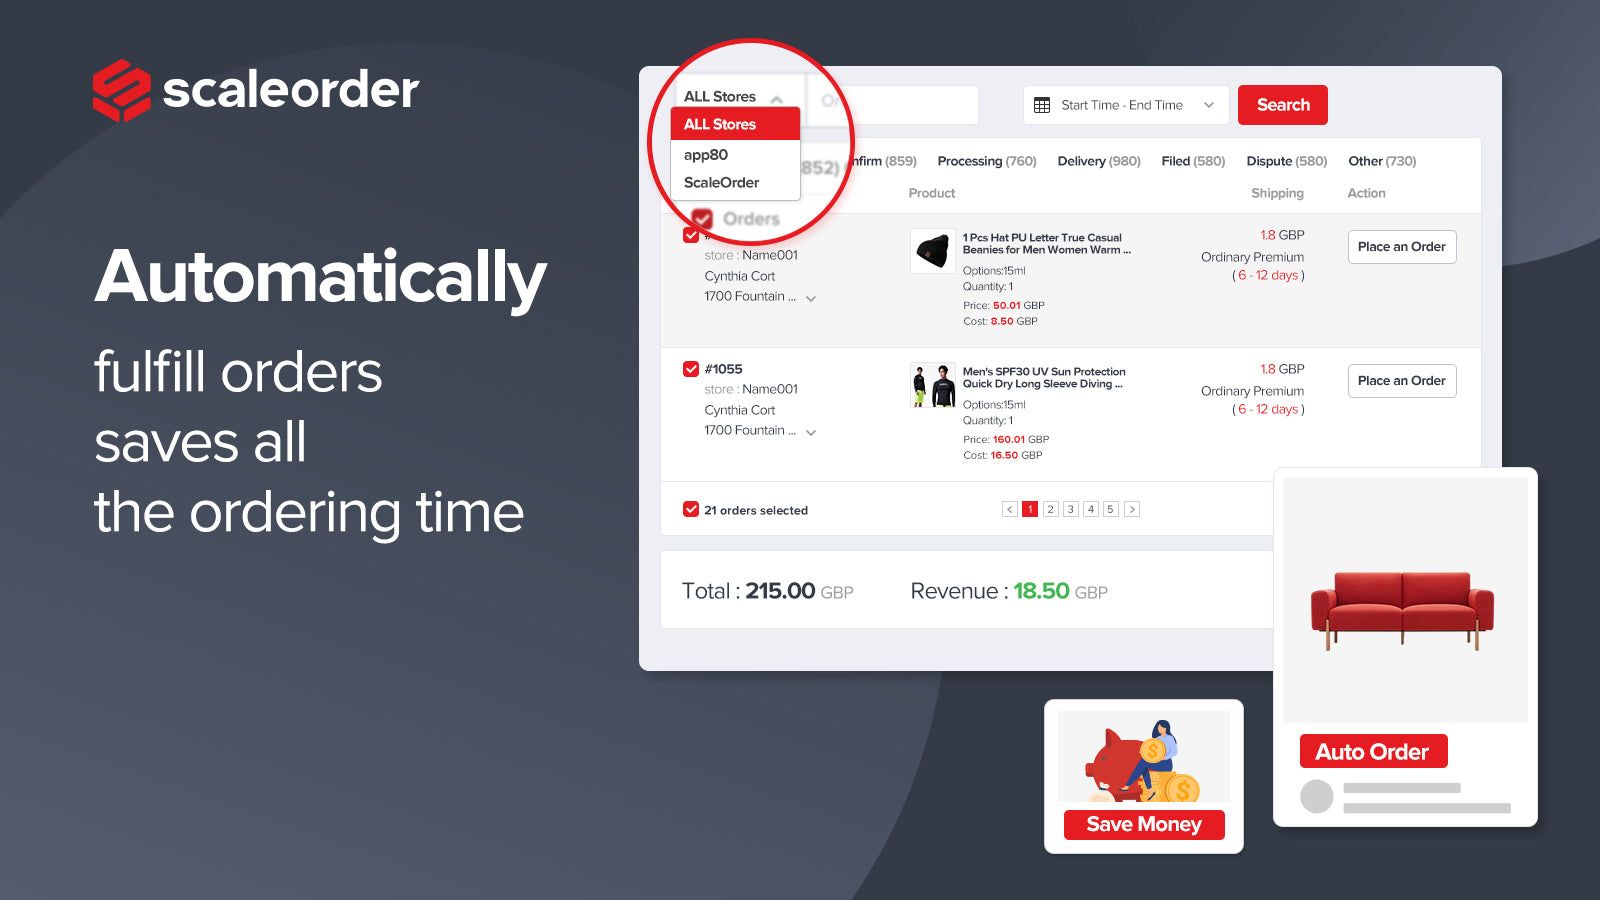 Automatically fulfill orders saves all the ordering time